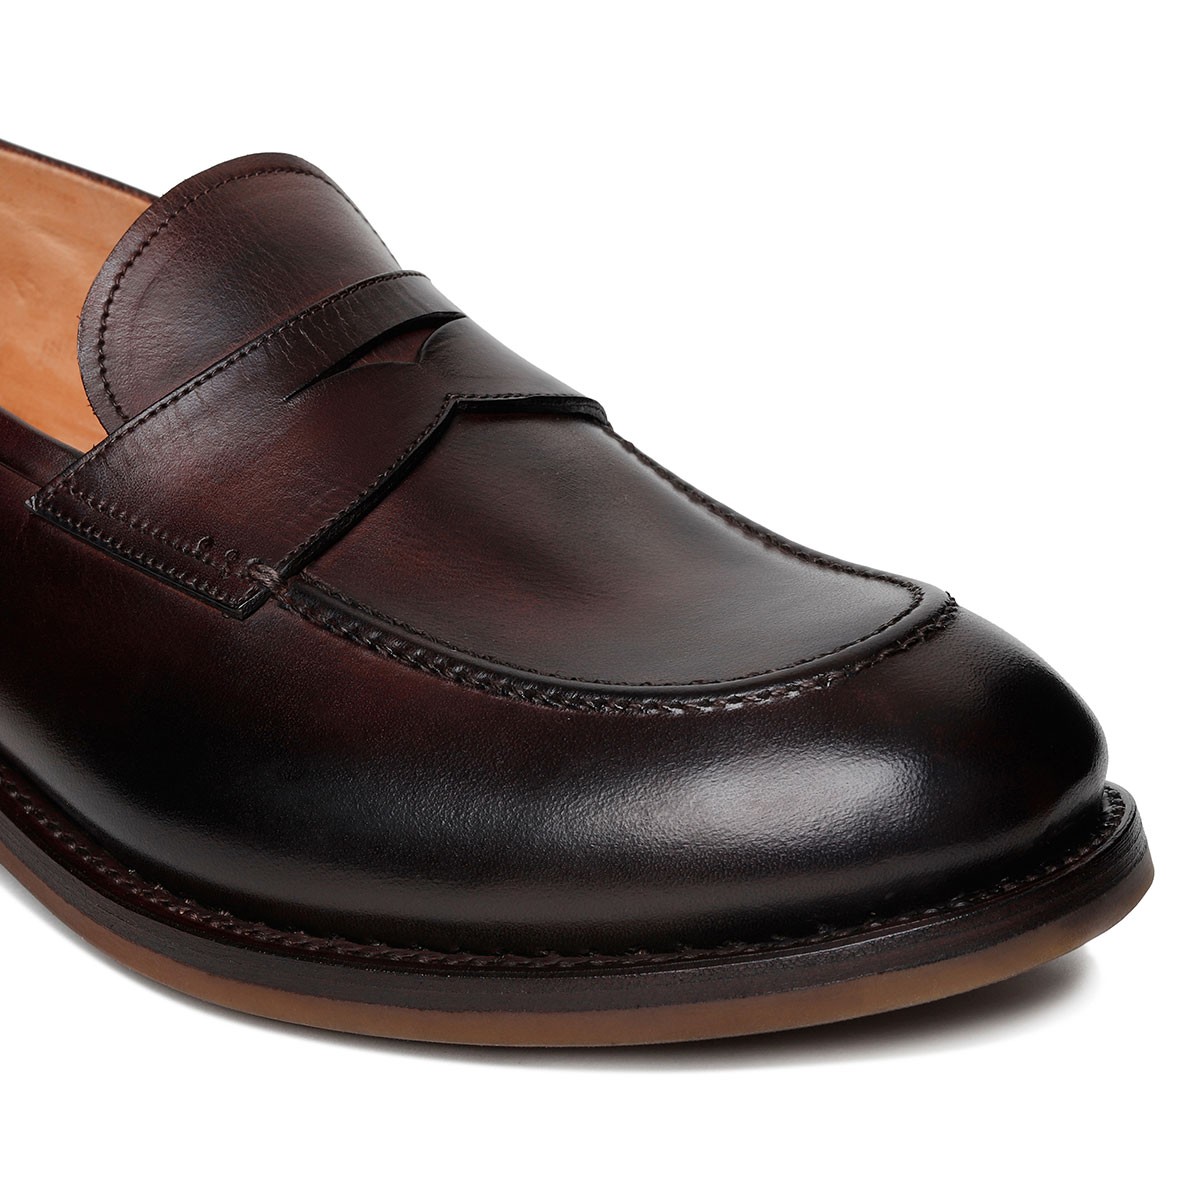 Bologna dark brown leather loafers